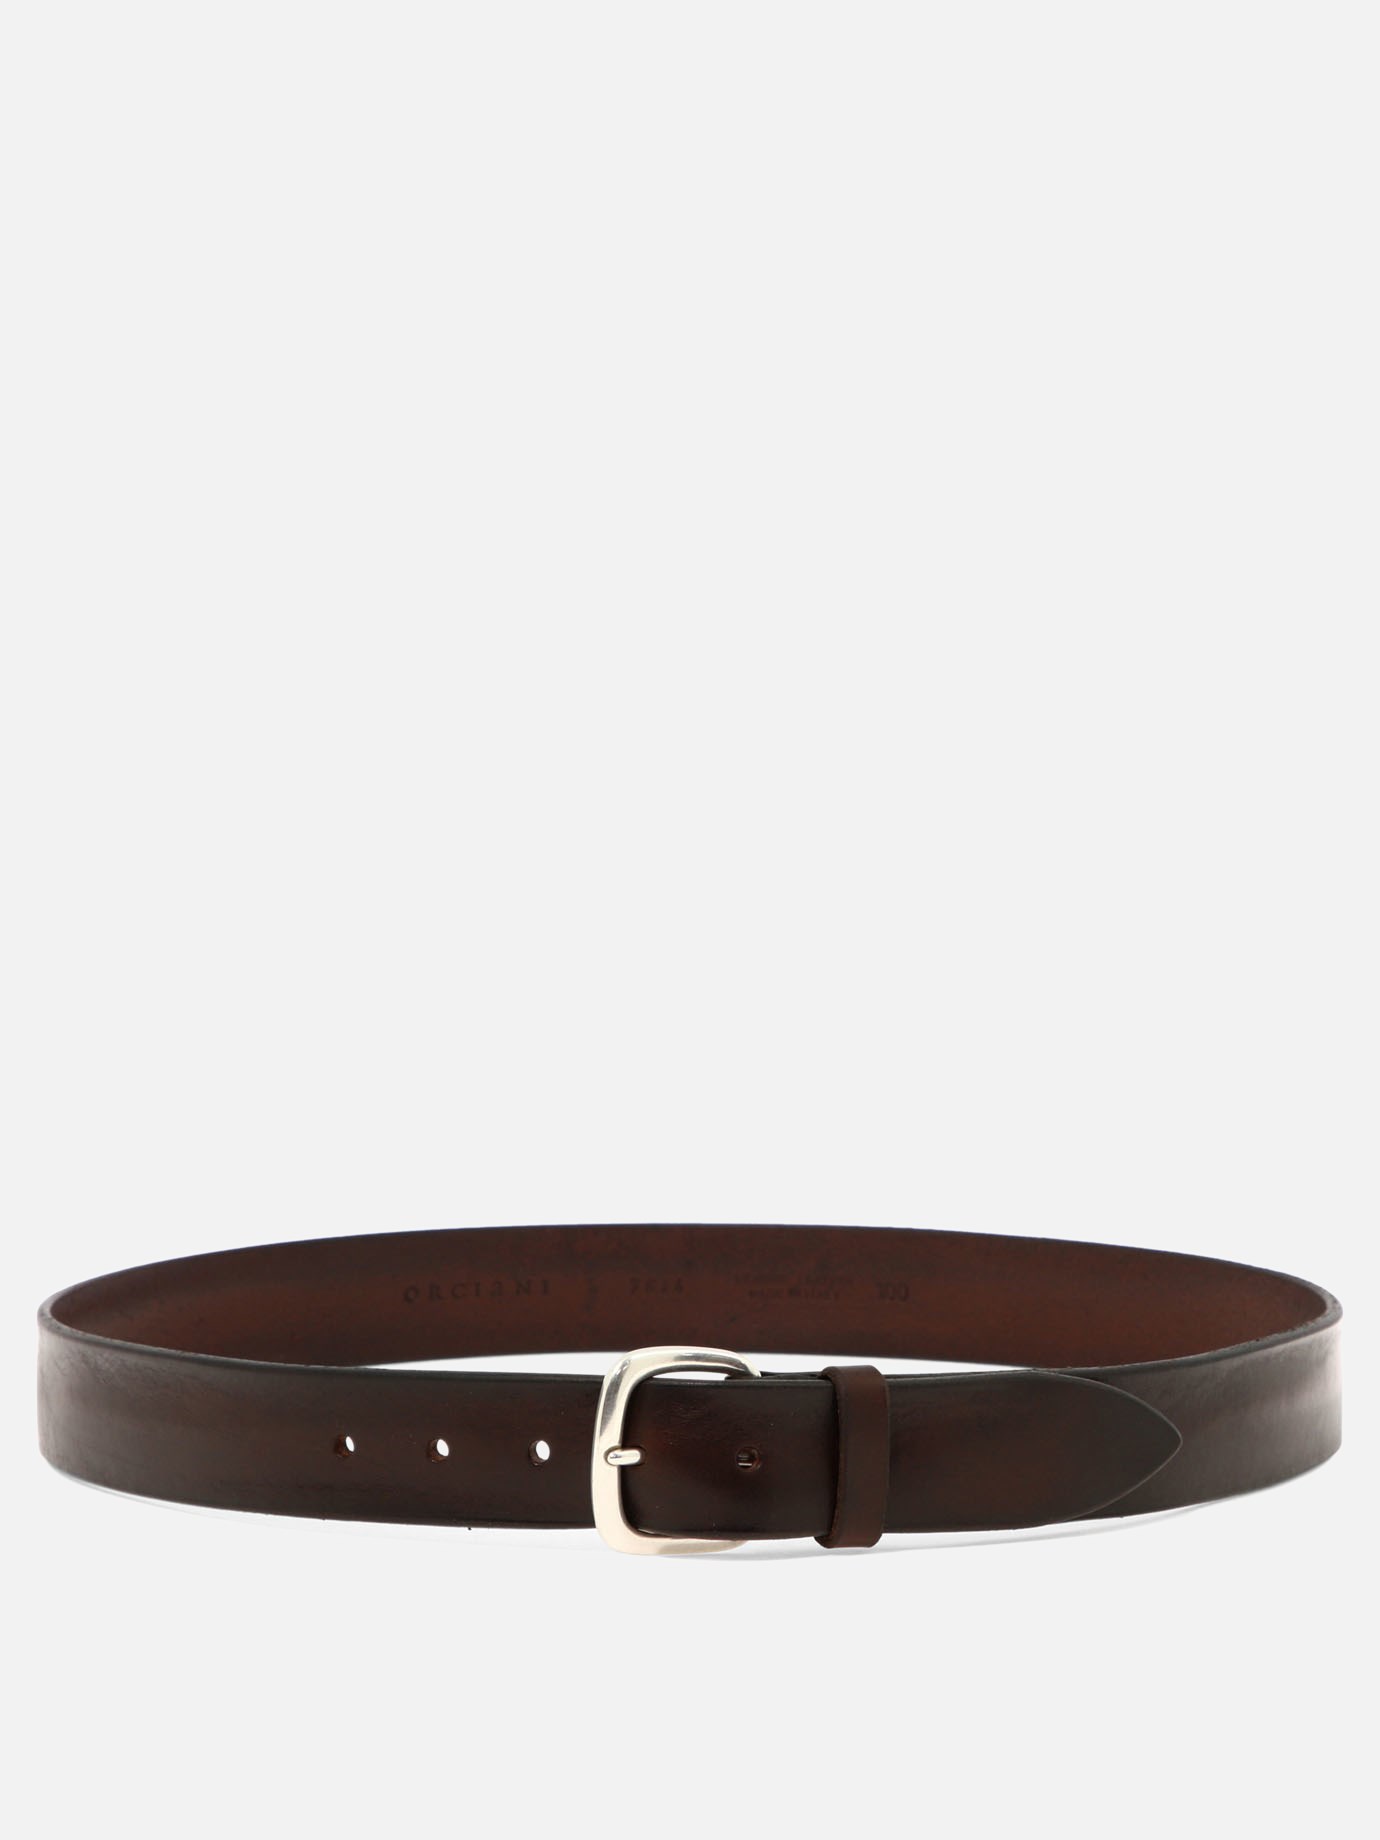  Bull Soft  belt by Orciani